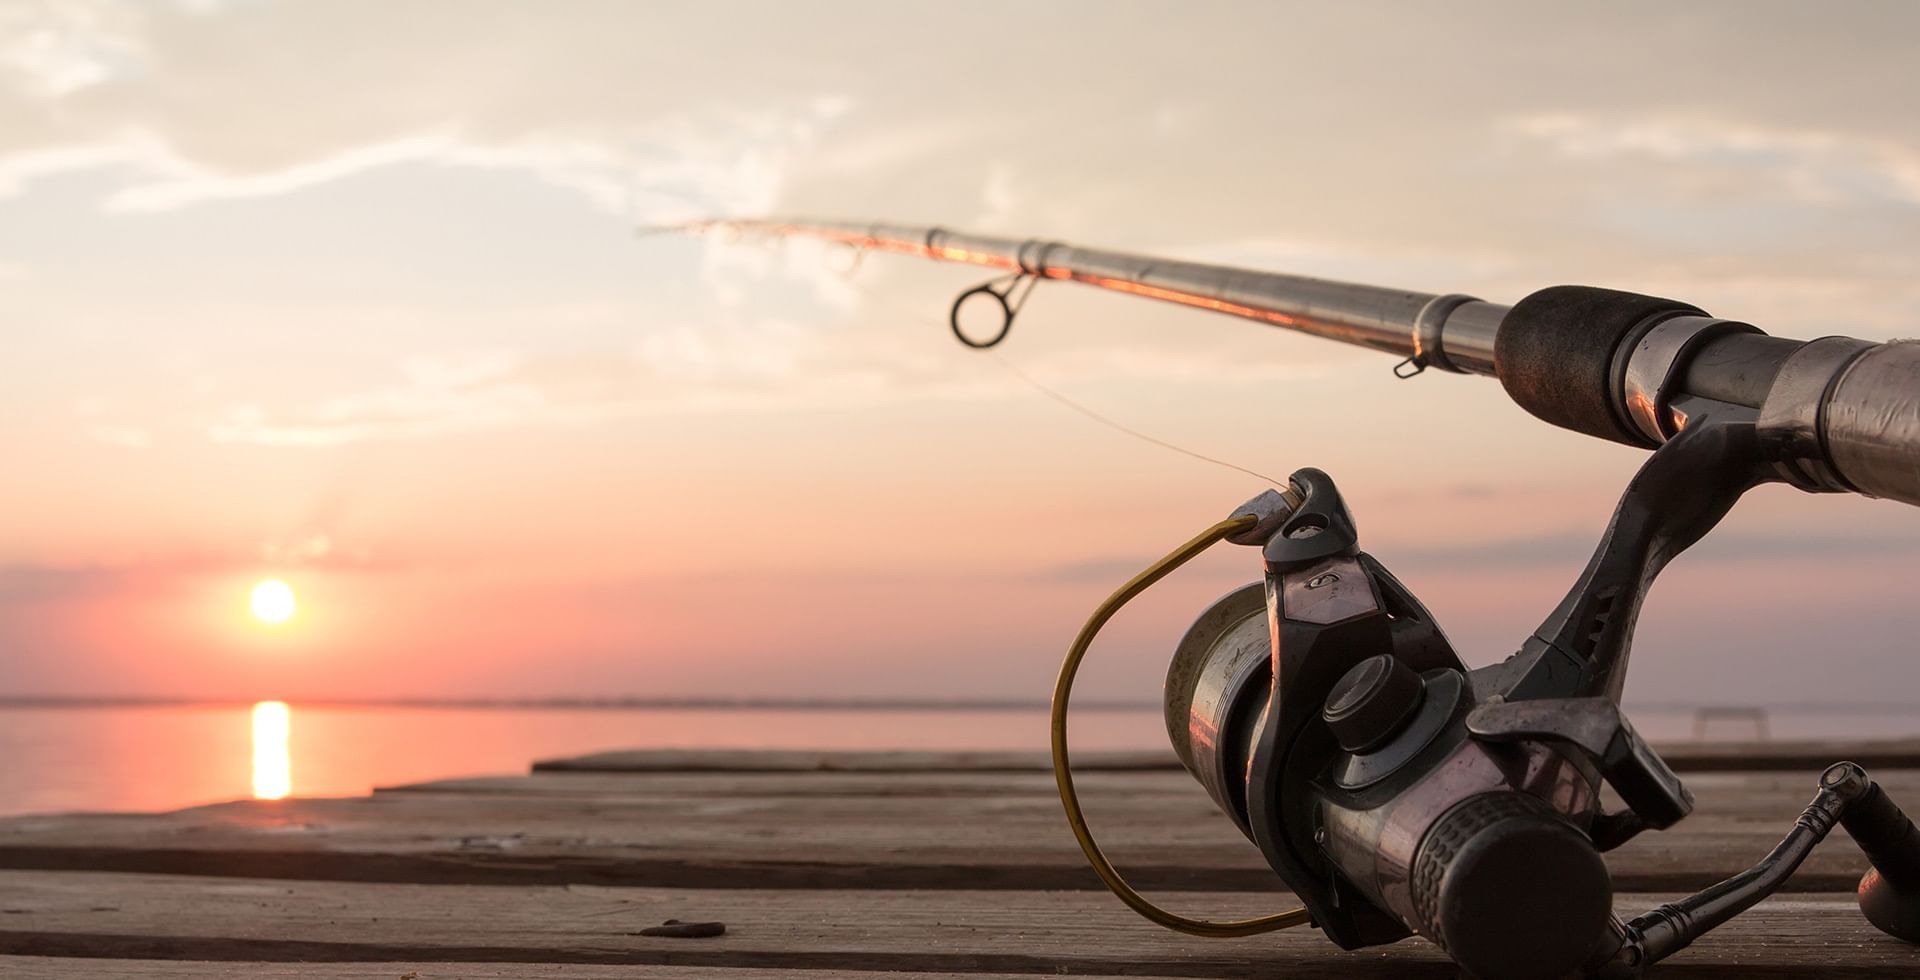 Fishing rod with the sun setting in the back